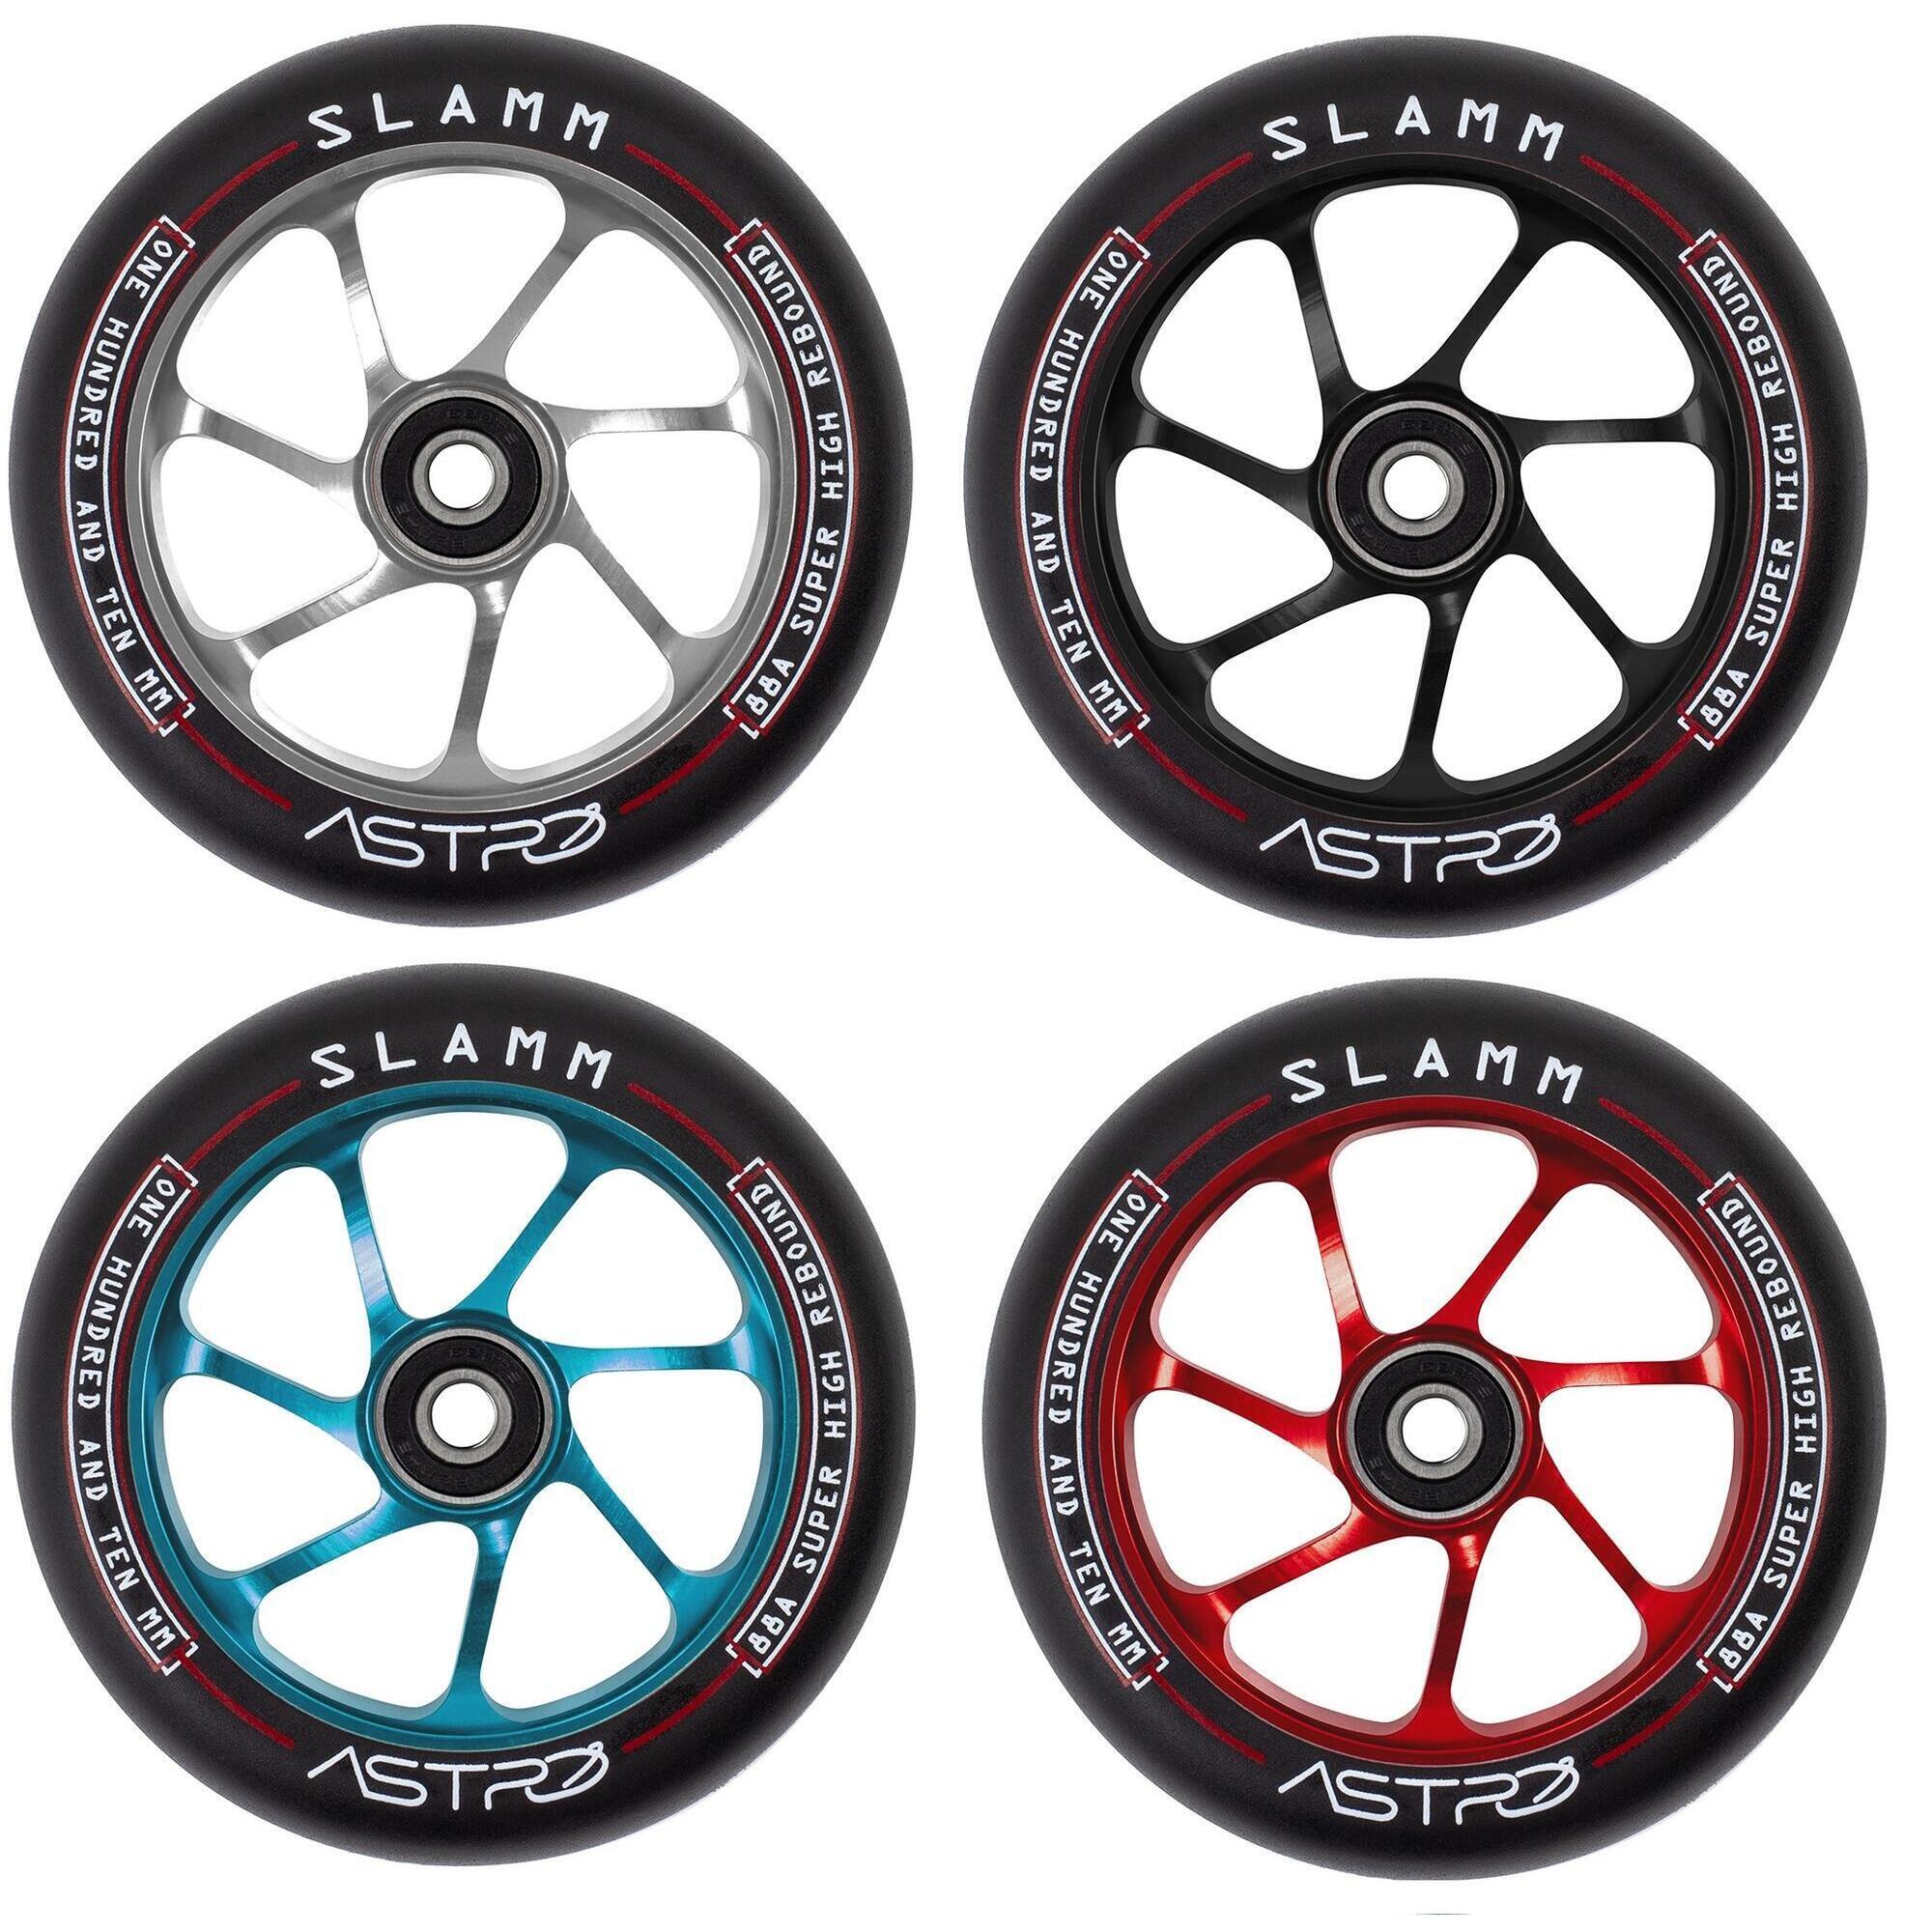 SLAMM SCOOTERS Astro 110mm Alloy Core Scooter Wheel and Bearings